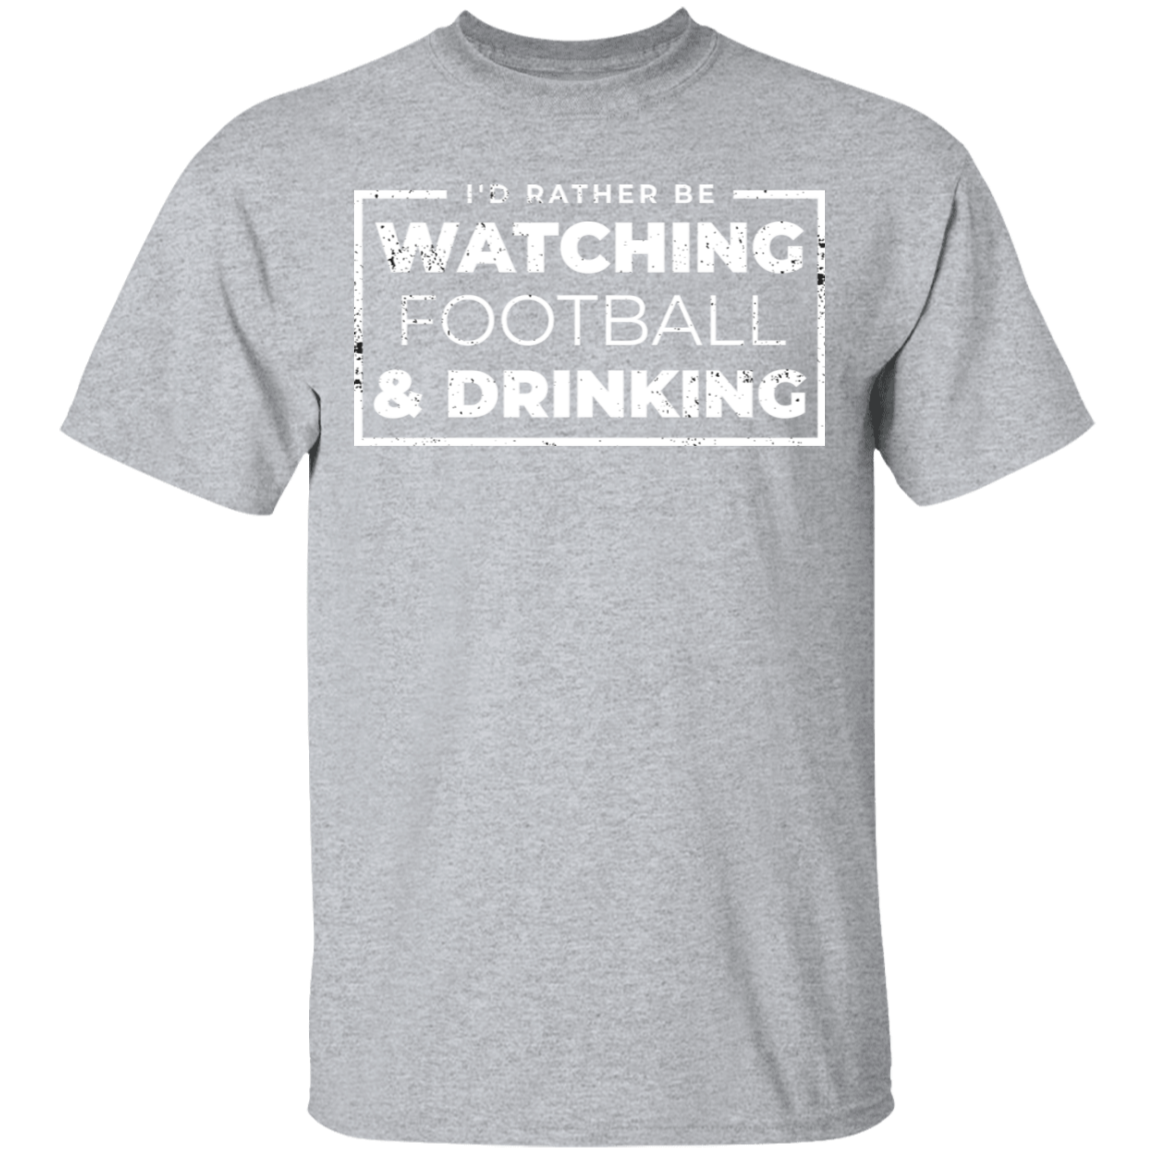 I'd Rather Be Watching Football & Drinking T-Shirt Apparel - The Beer Lodge